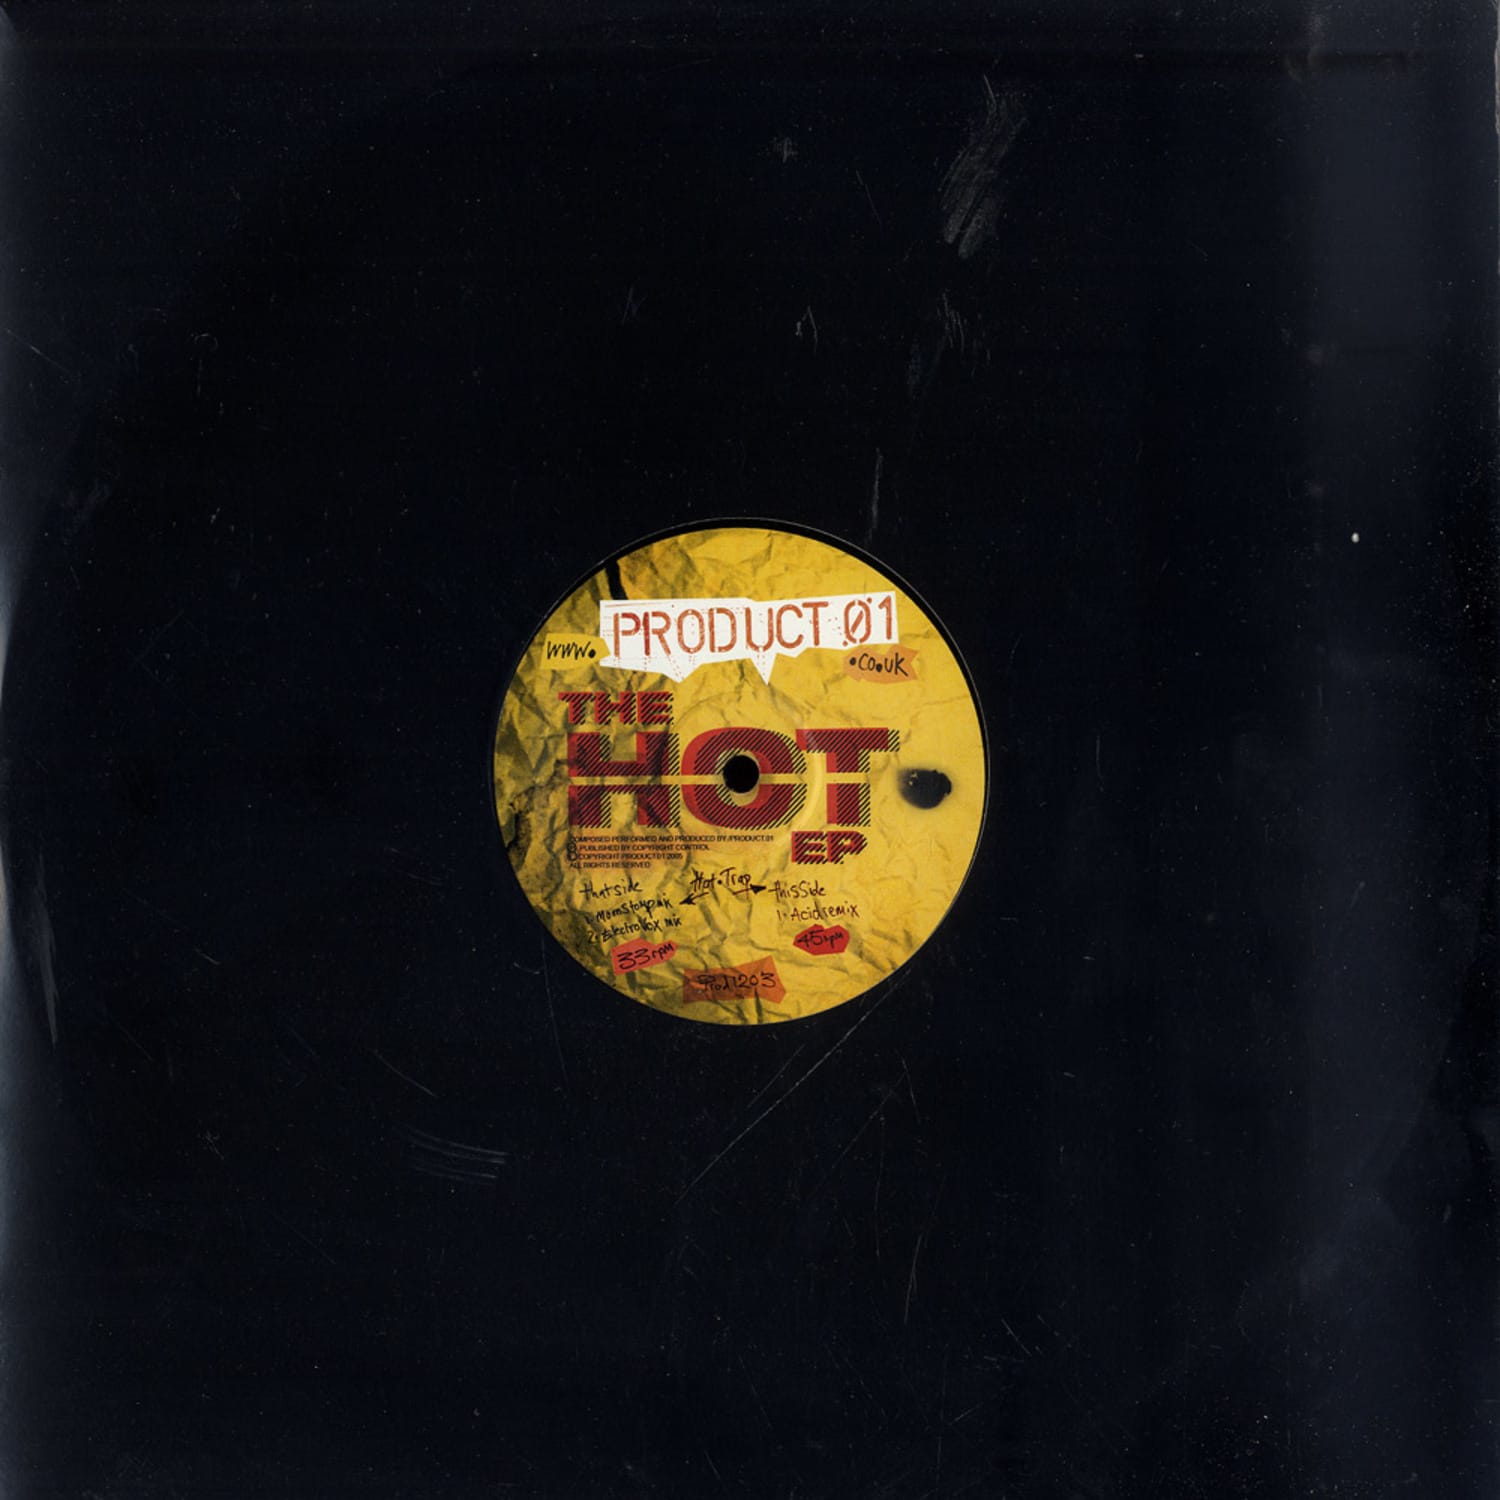 Product 01 - THE HOT EP